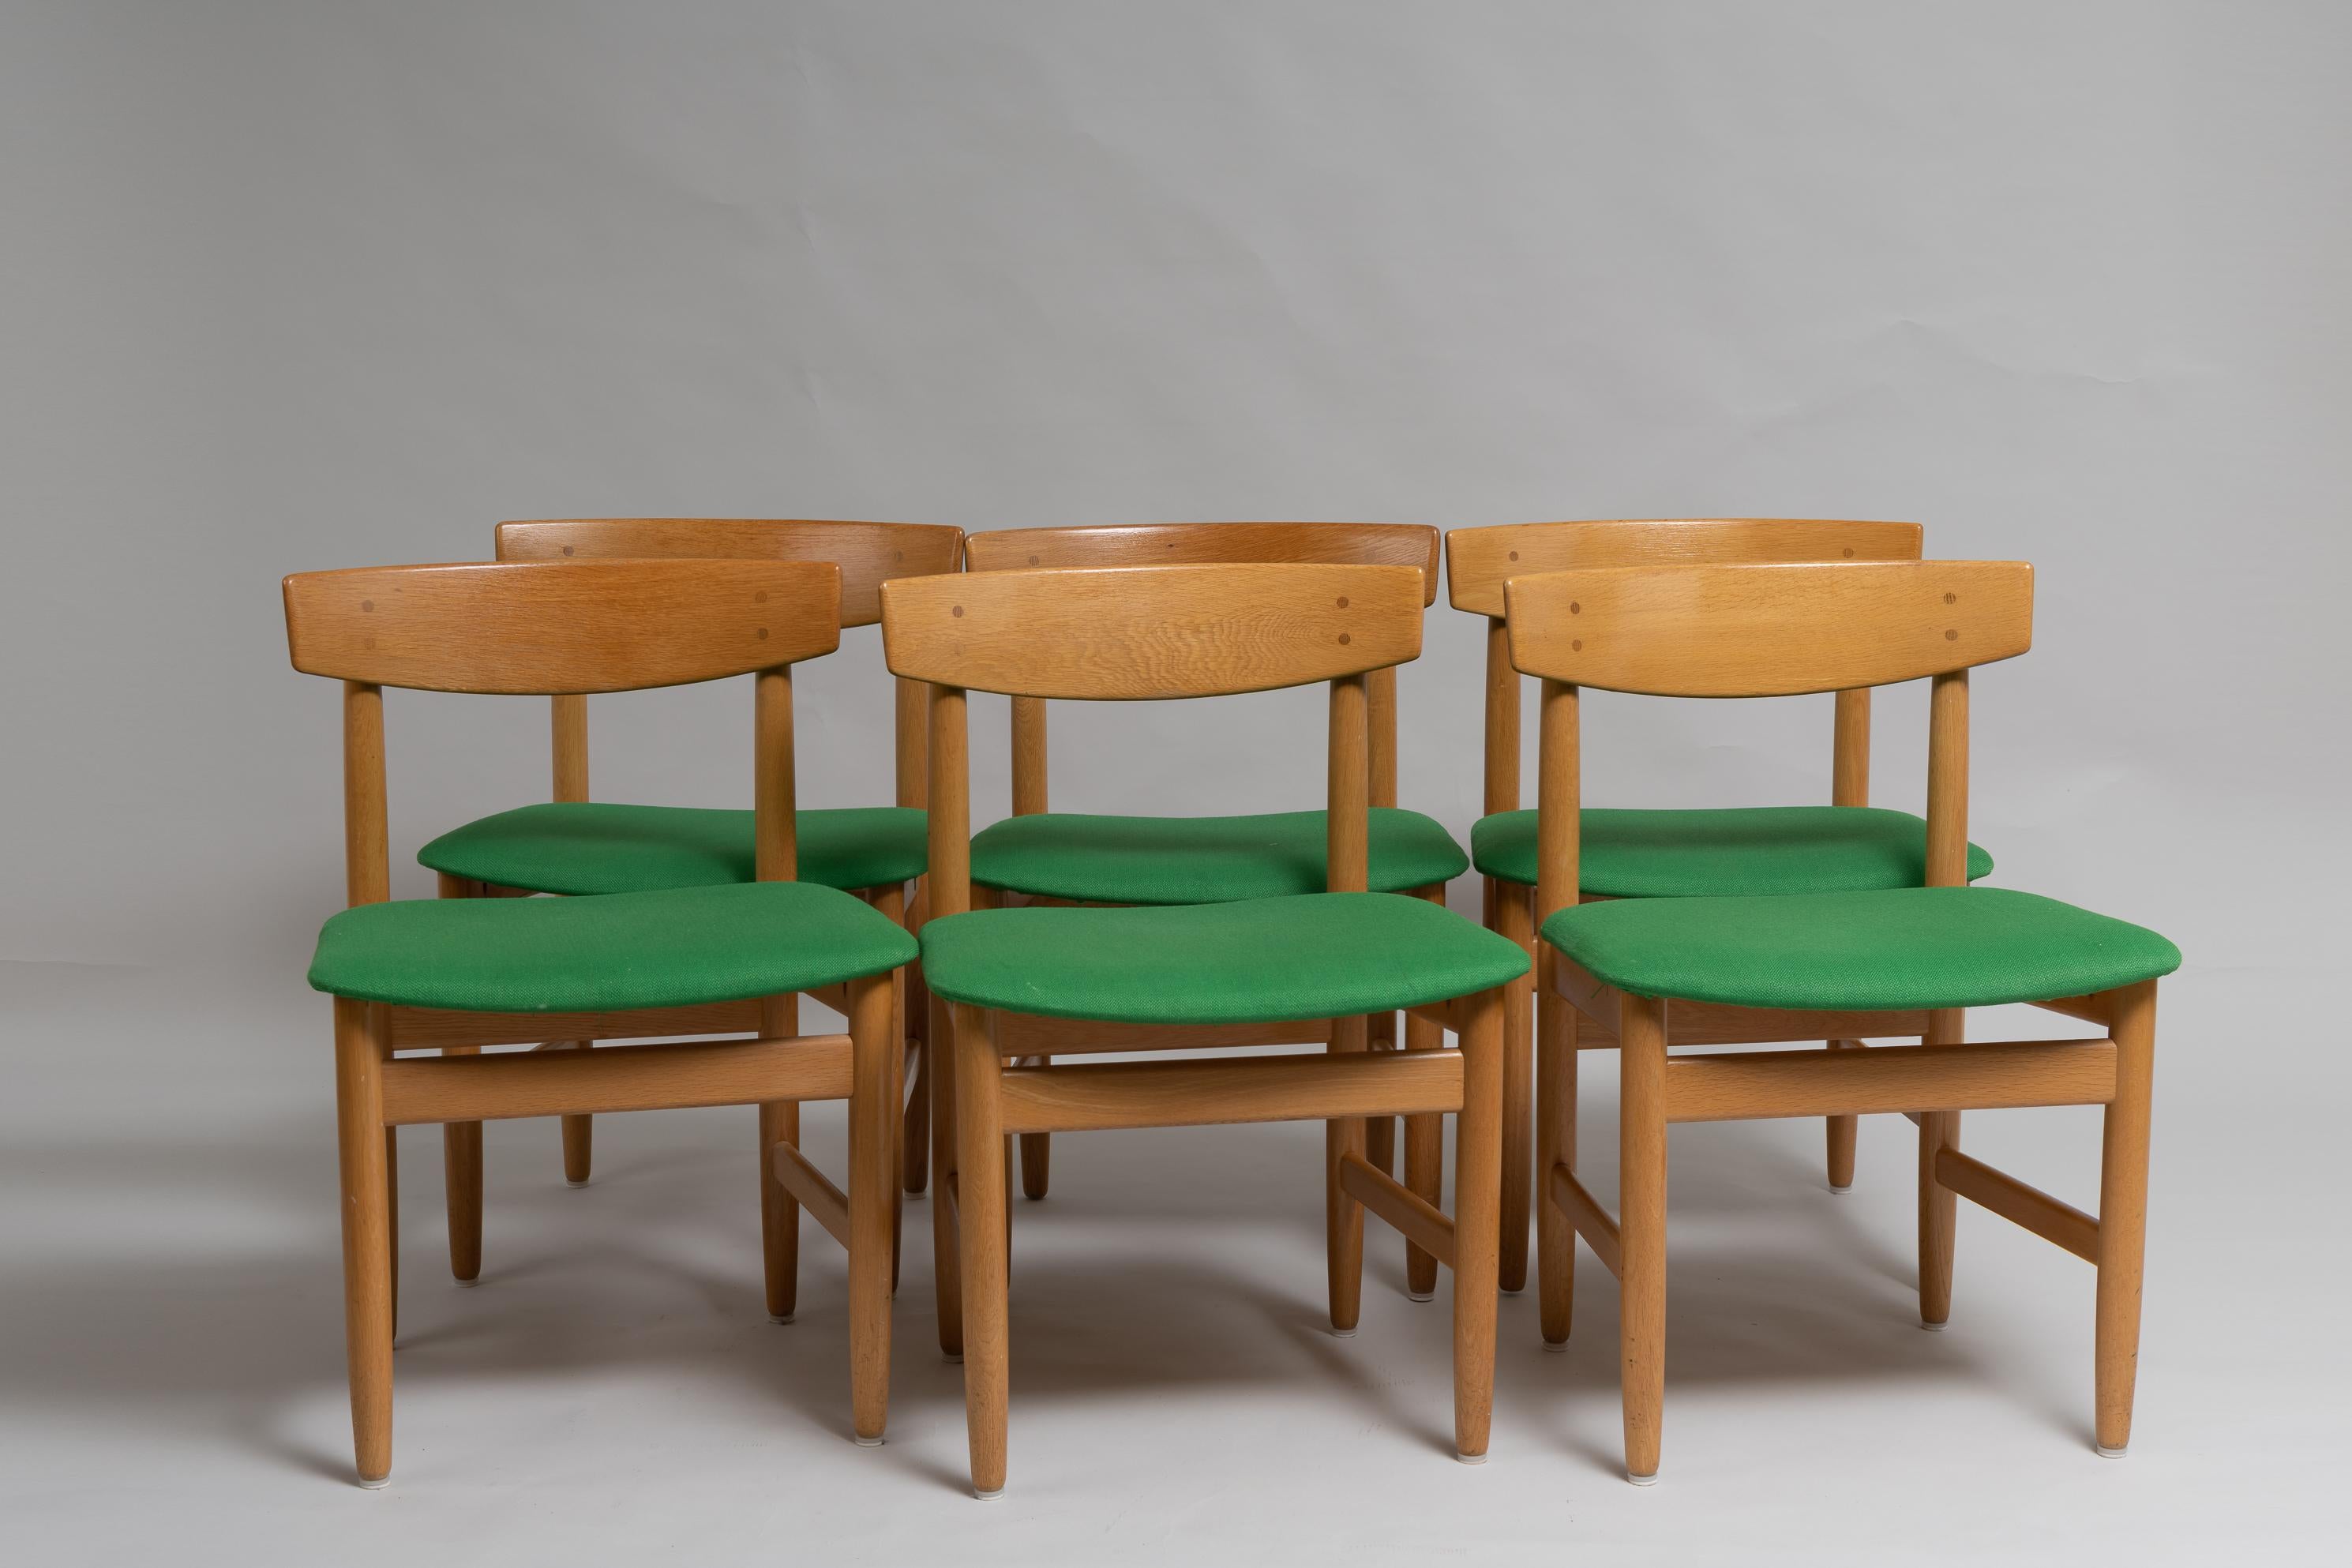 Børge Mogensen Øresund set of 6 oak dining room chairs. Made by Karl Andersson & Söner in Sweden around the mid-20th century, around the 1950s to 1960. These 6 chairs are simple and elegant in accordance with the Scandinavian modern ideals. They